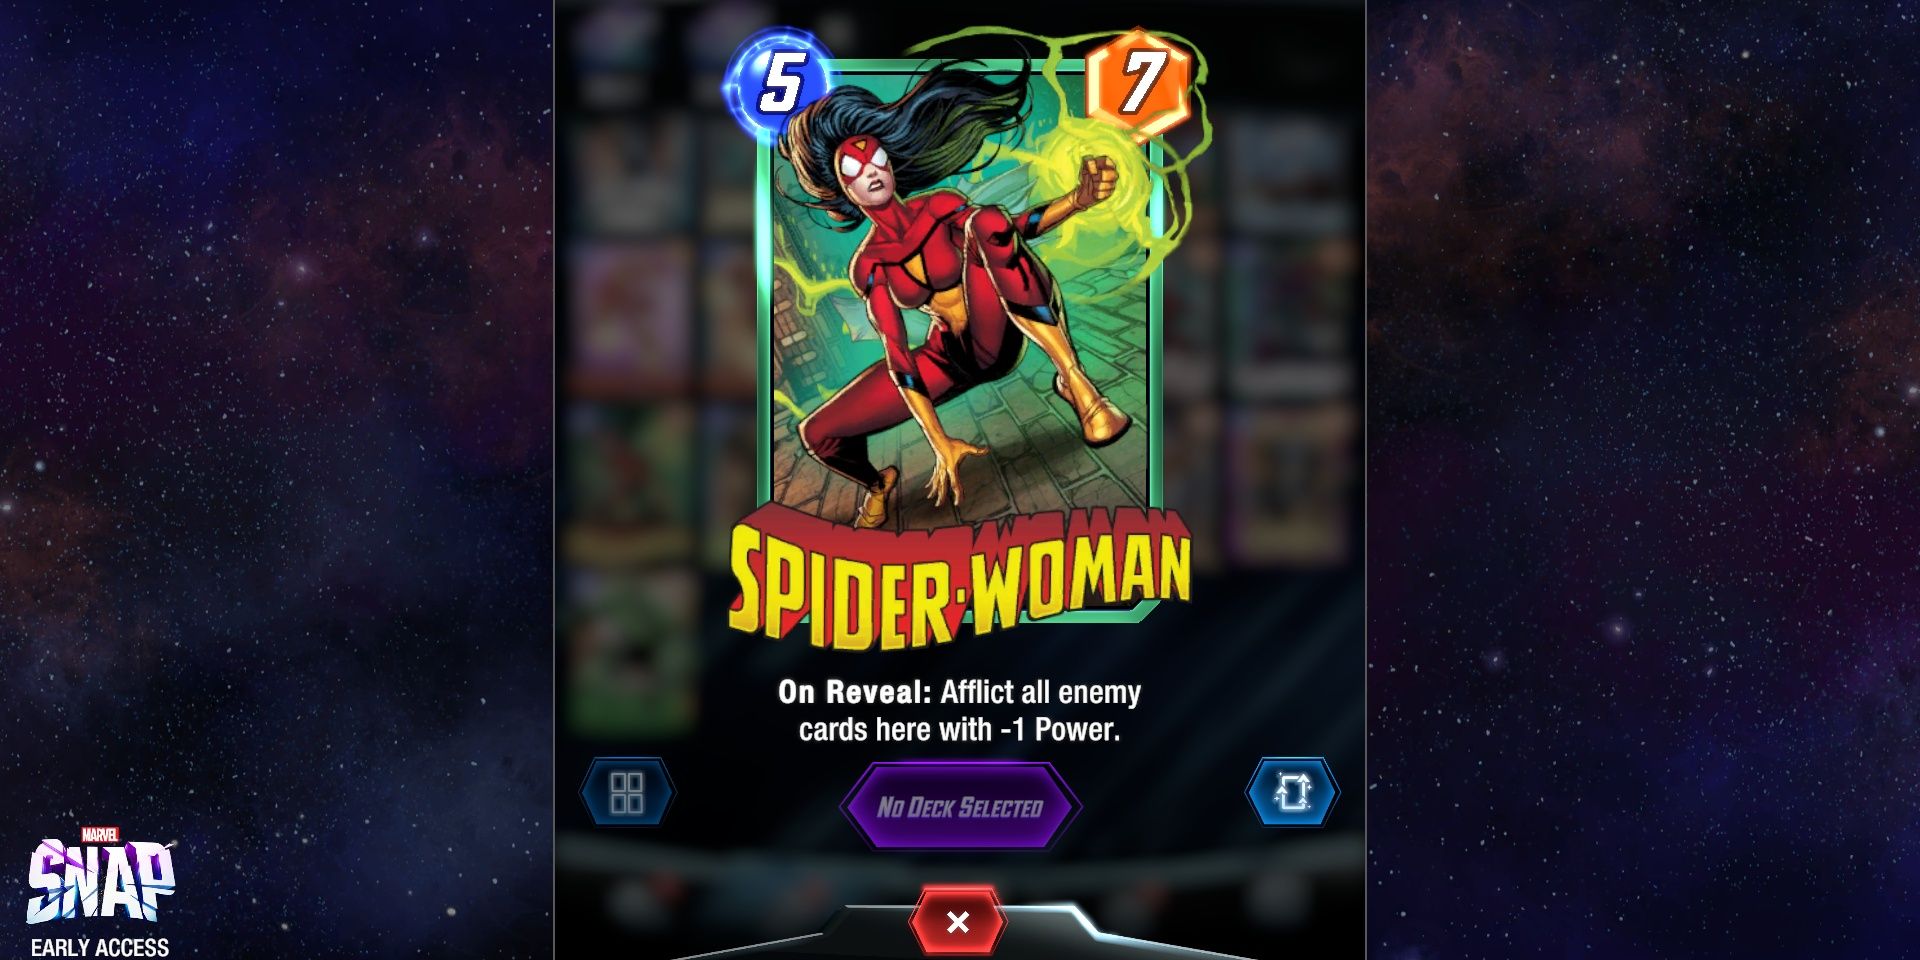 The Spider-Woman card in Marvel Snap on top of promotional art in a split image